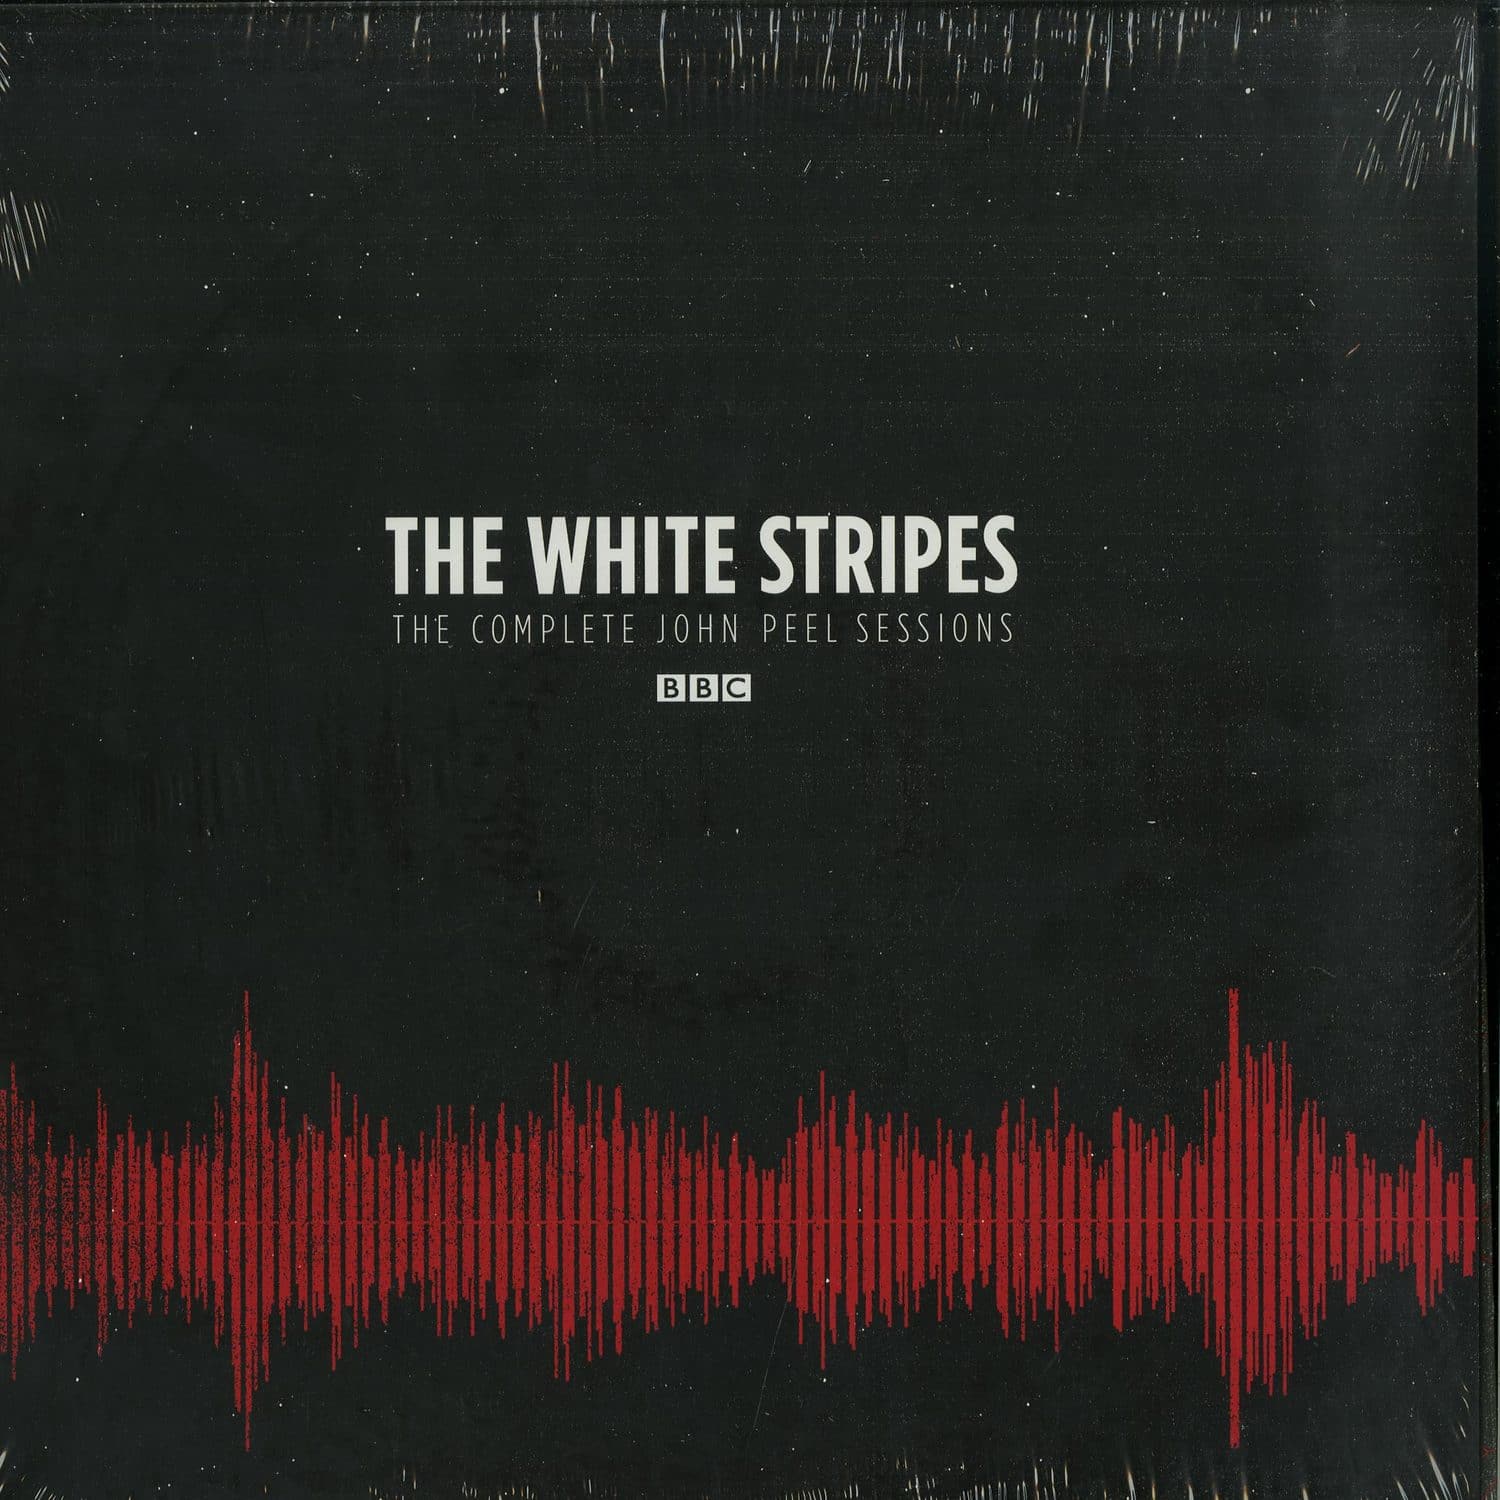 The White Stripes - THE COMPLETE JOHN PEEL SESSIONS 